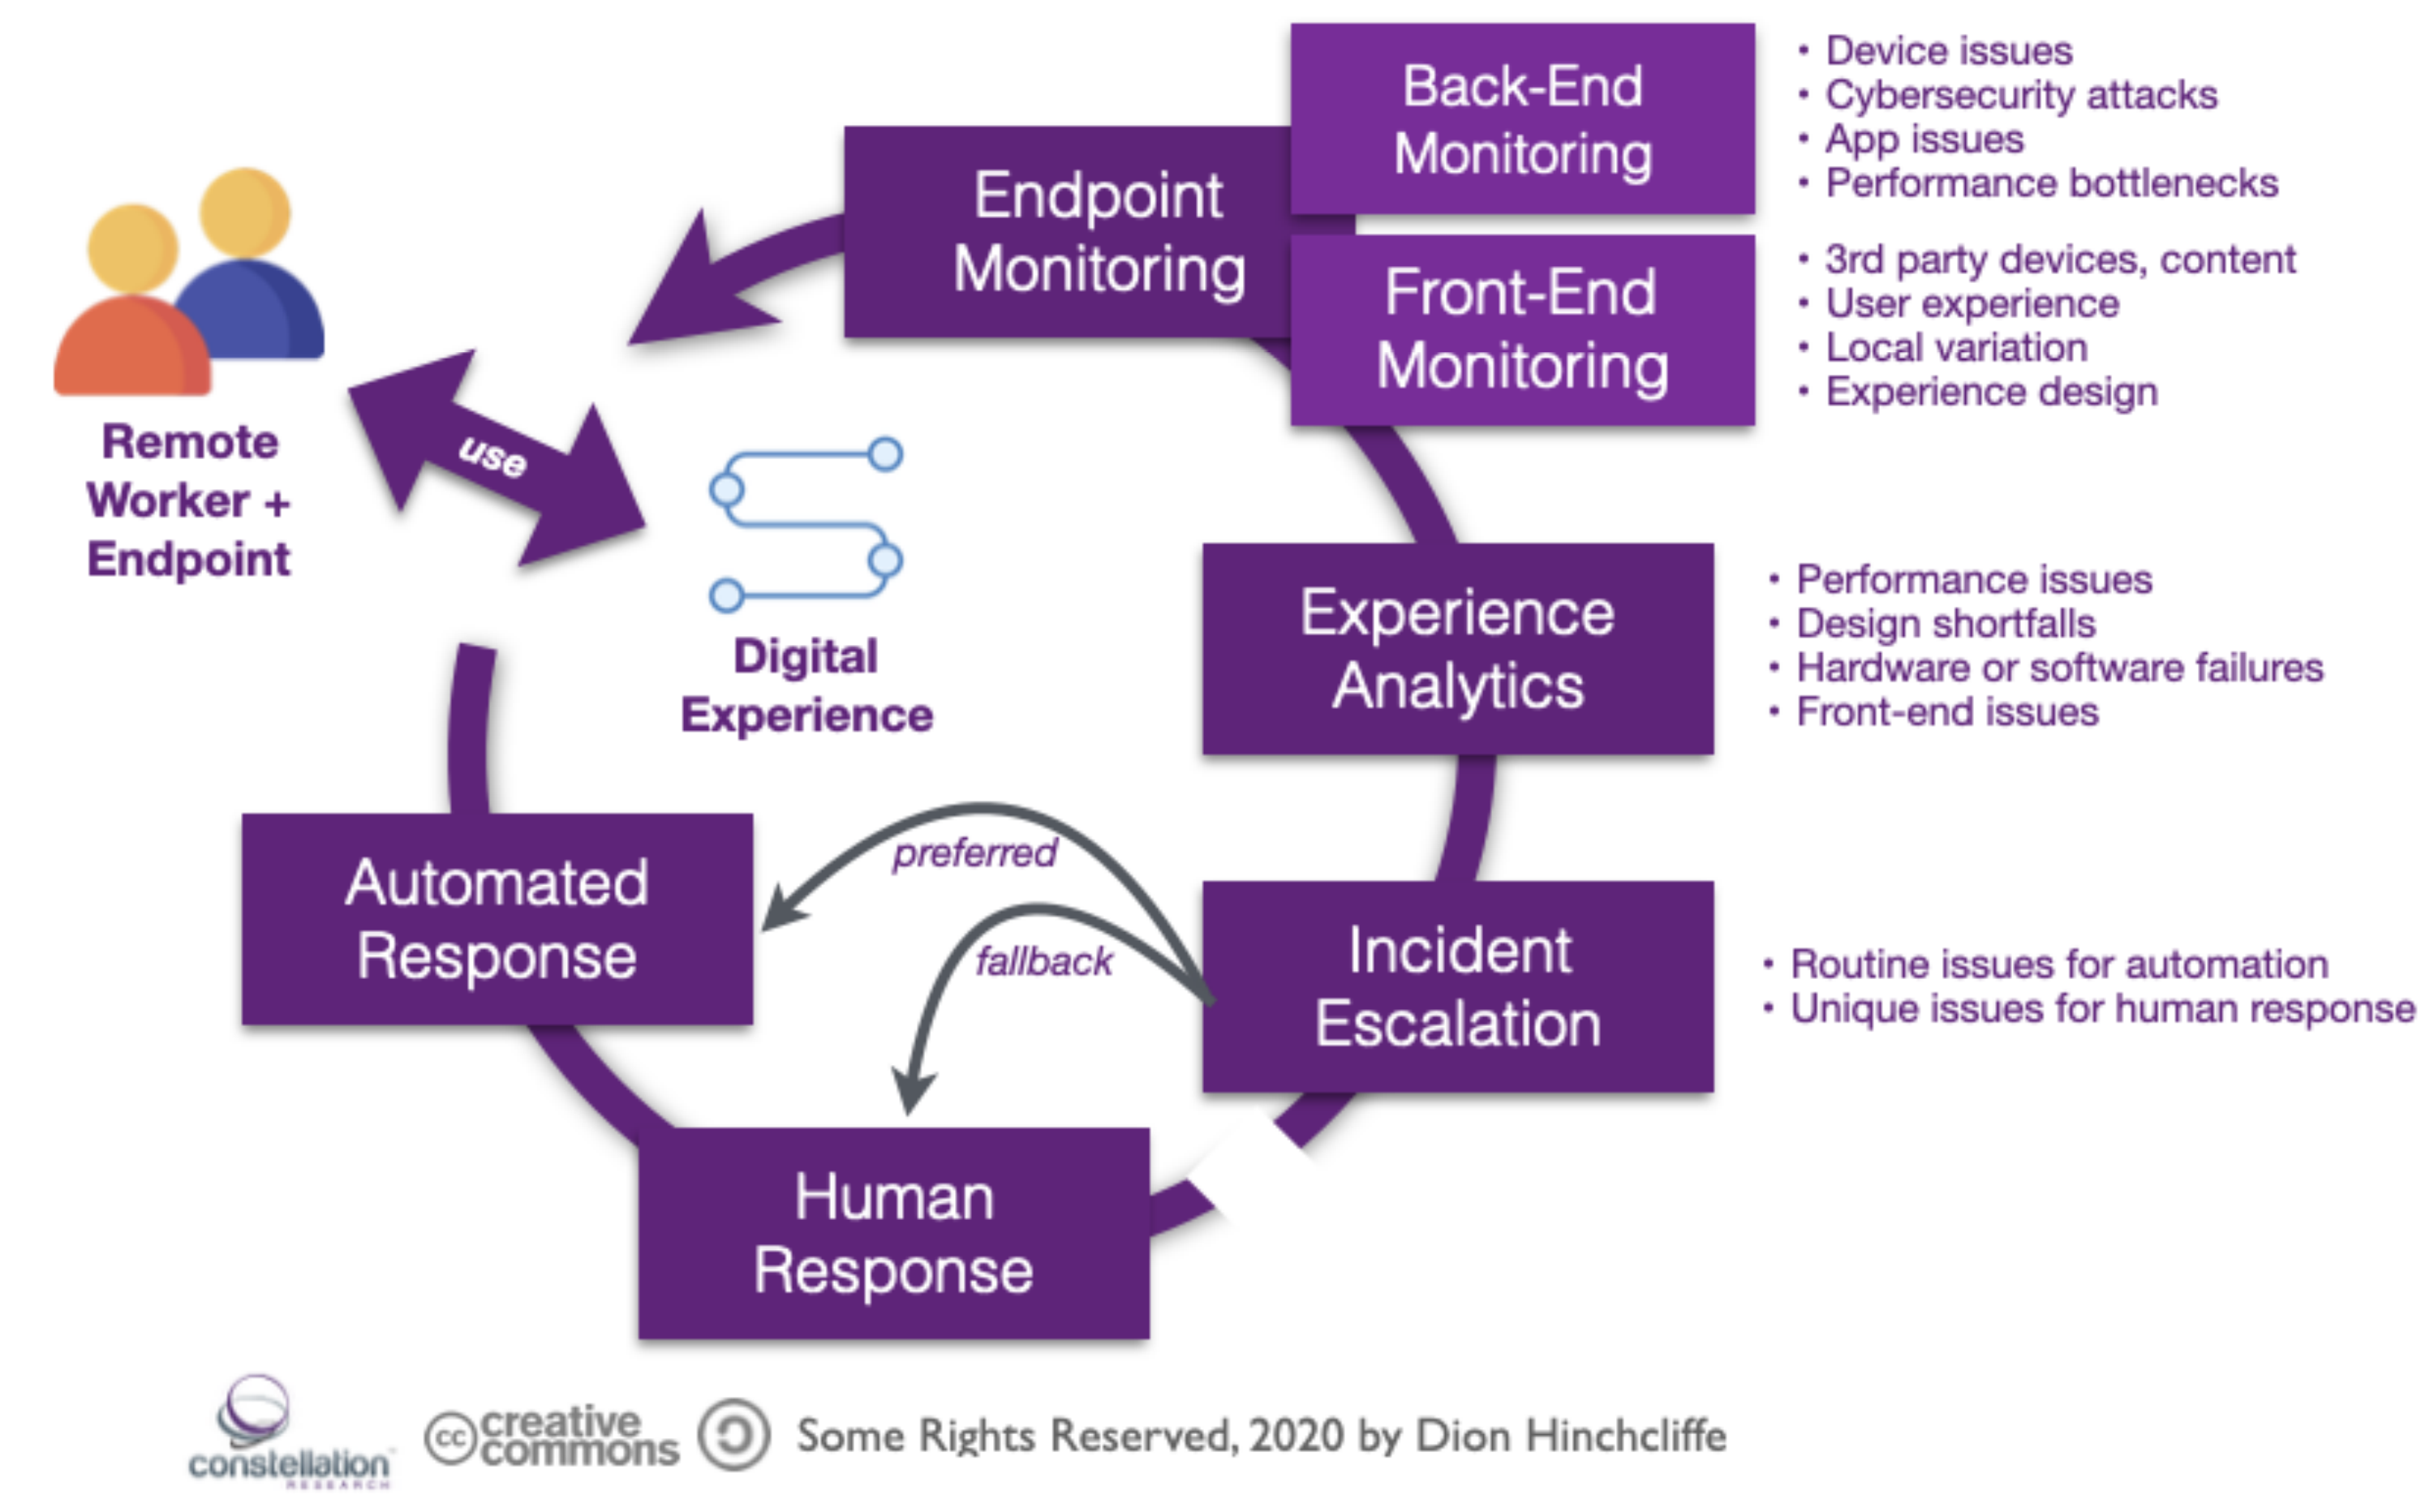 The future of endpoint management depends on digital experience monitoring